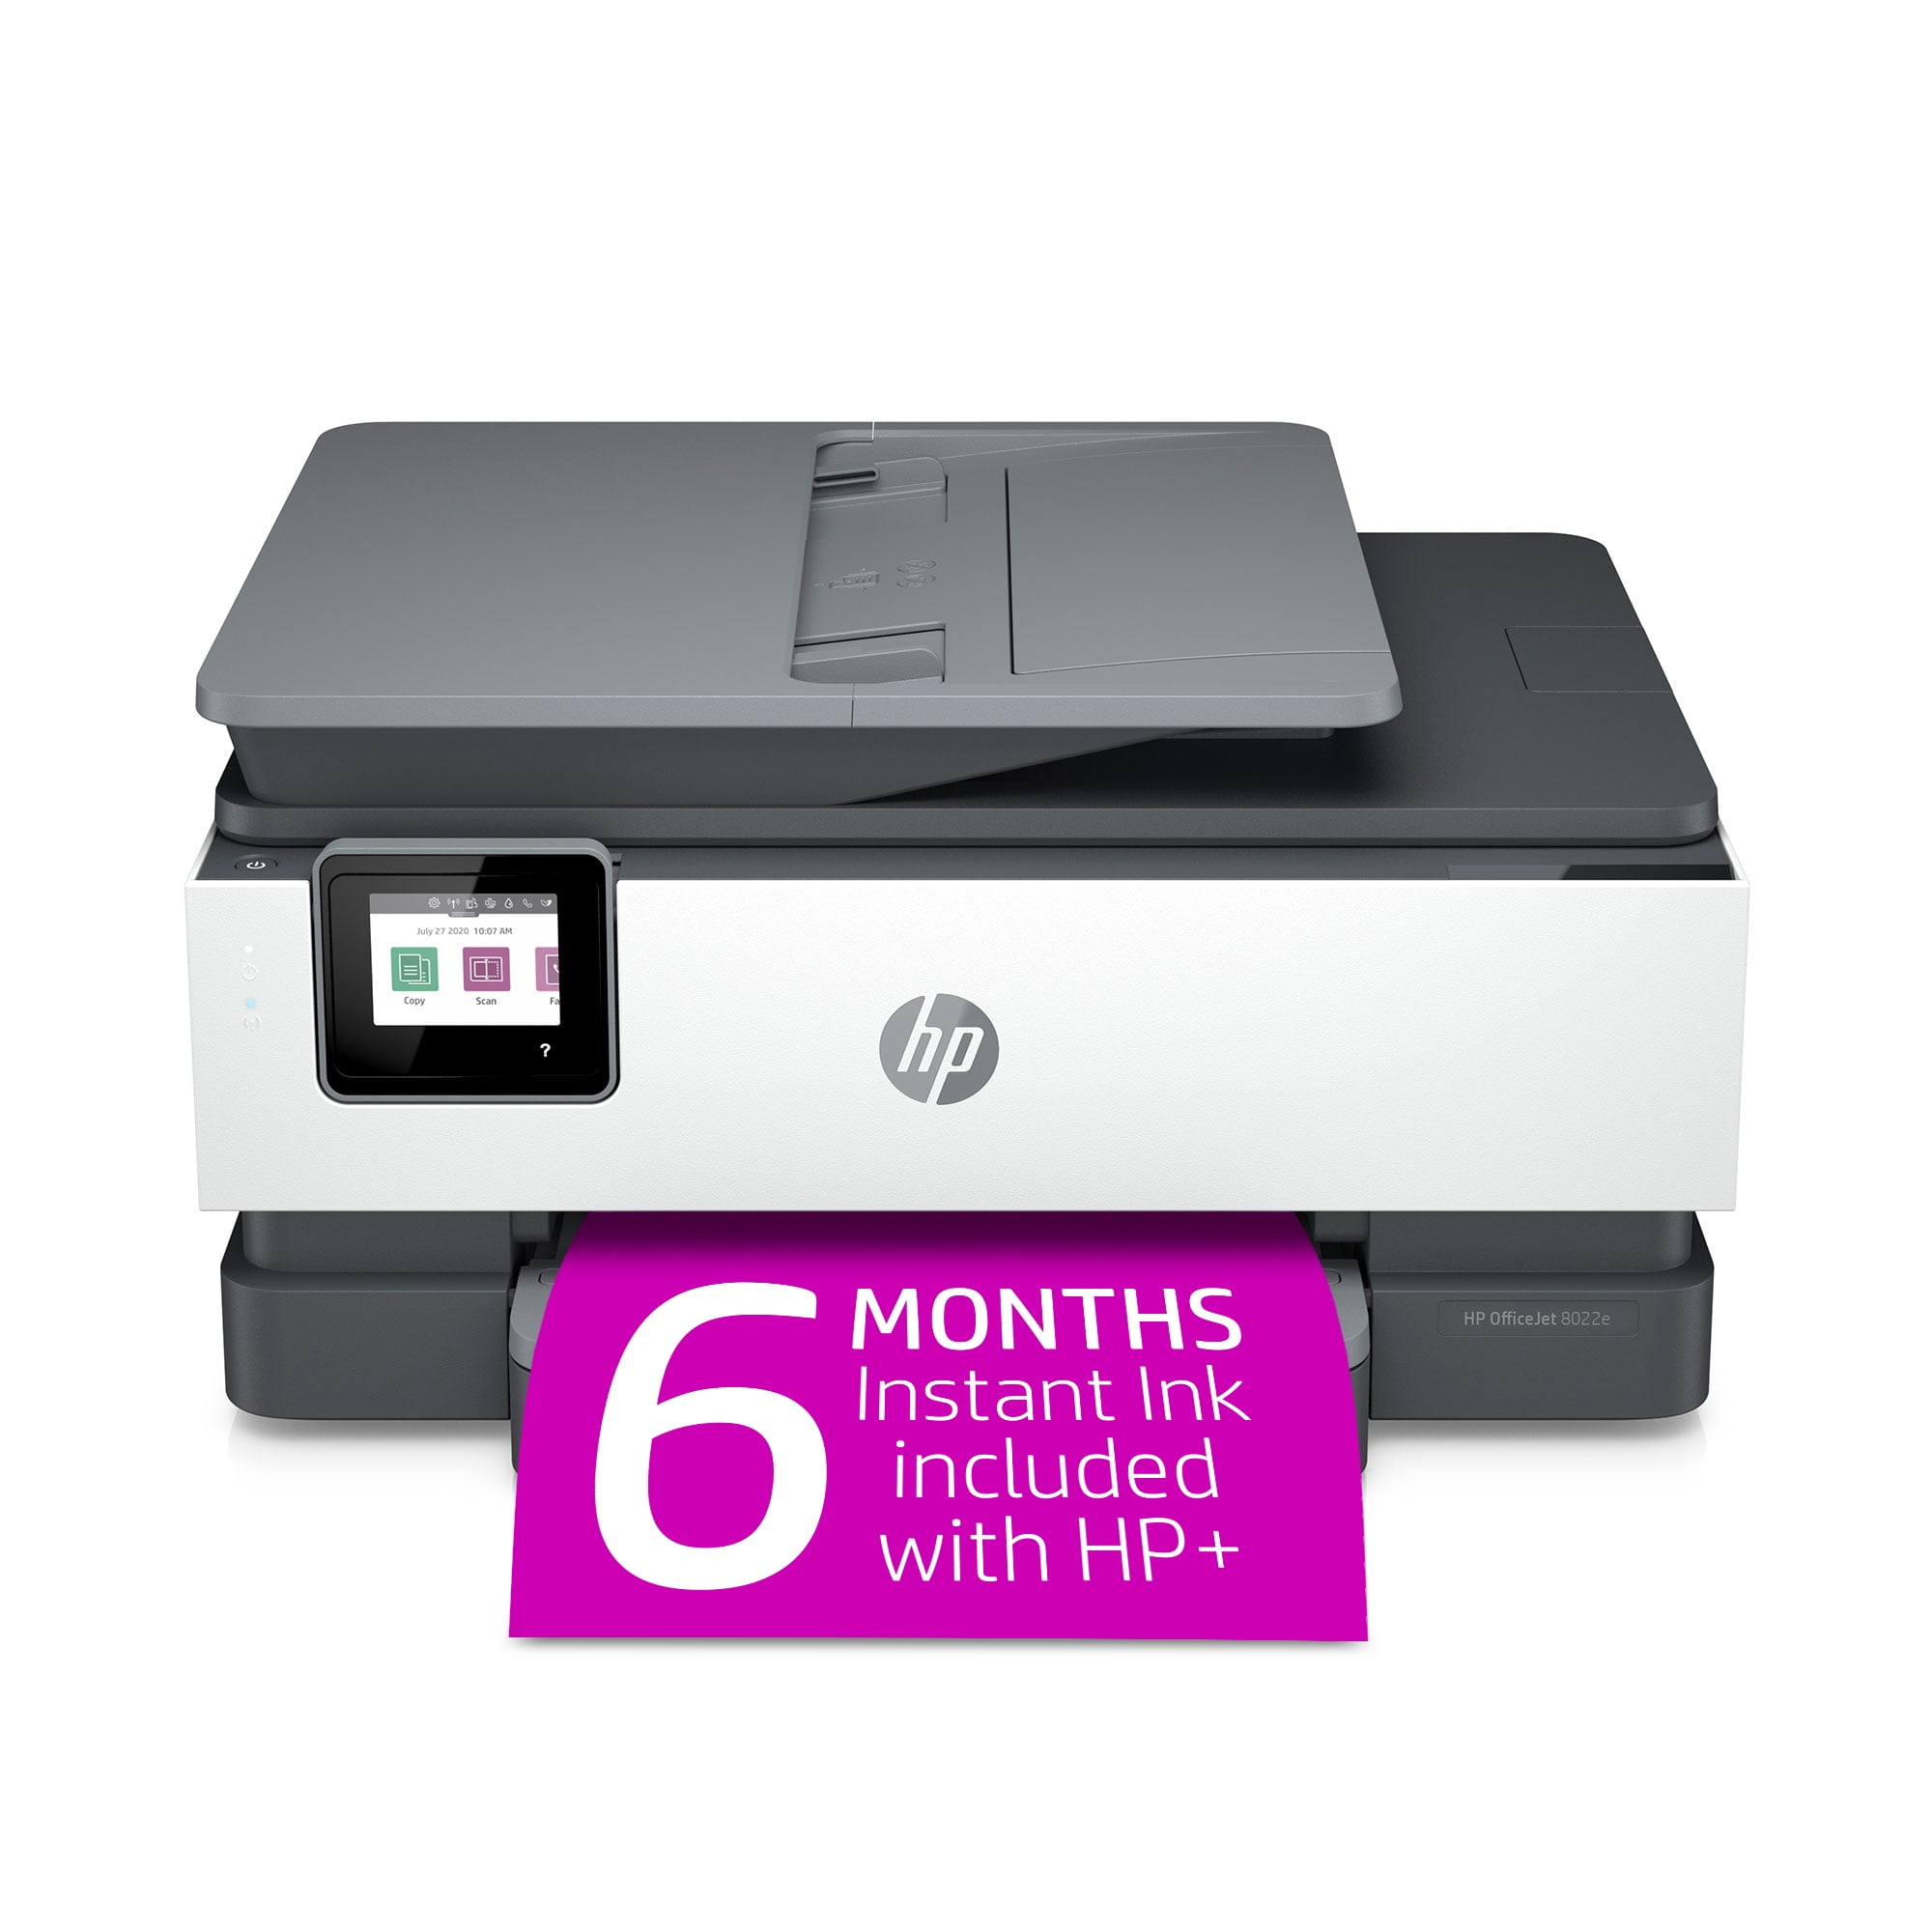 HP OfficeJet 8022e All-in-One Wireless Color Inkjet Printer - 6 Months Free Instant Ink with HP+